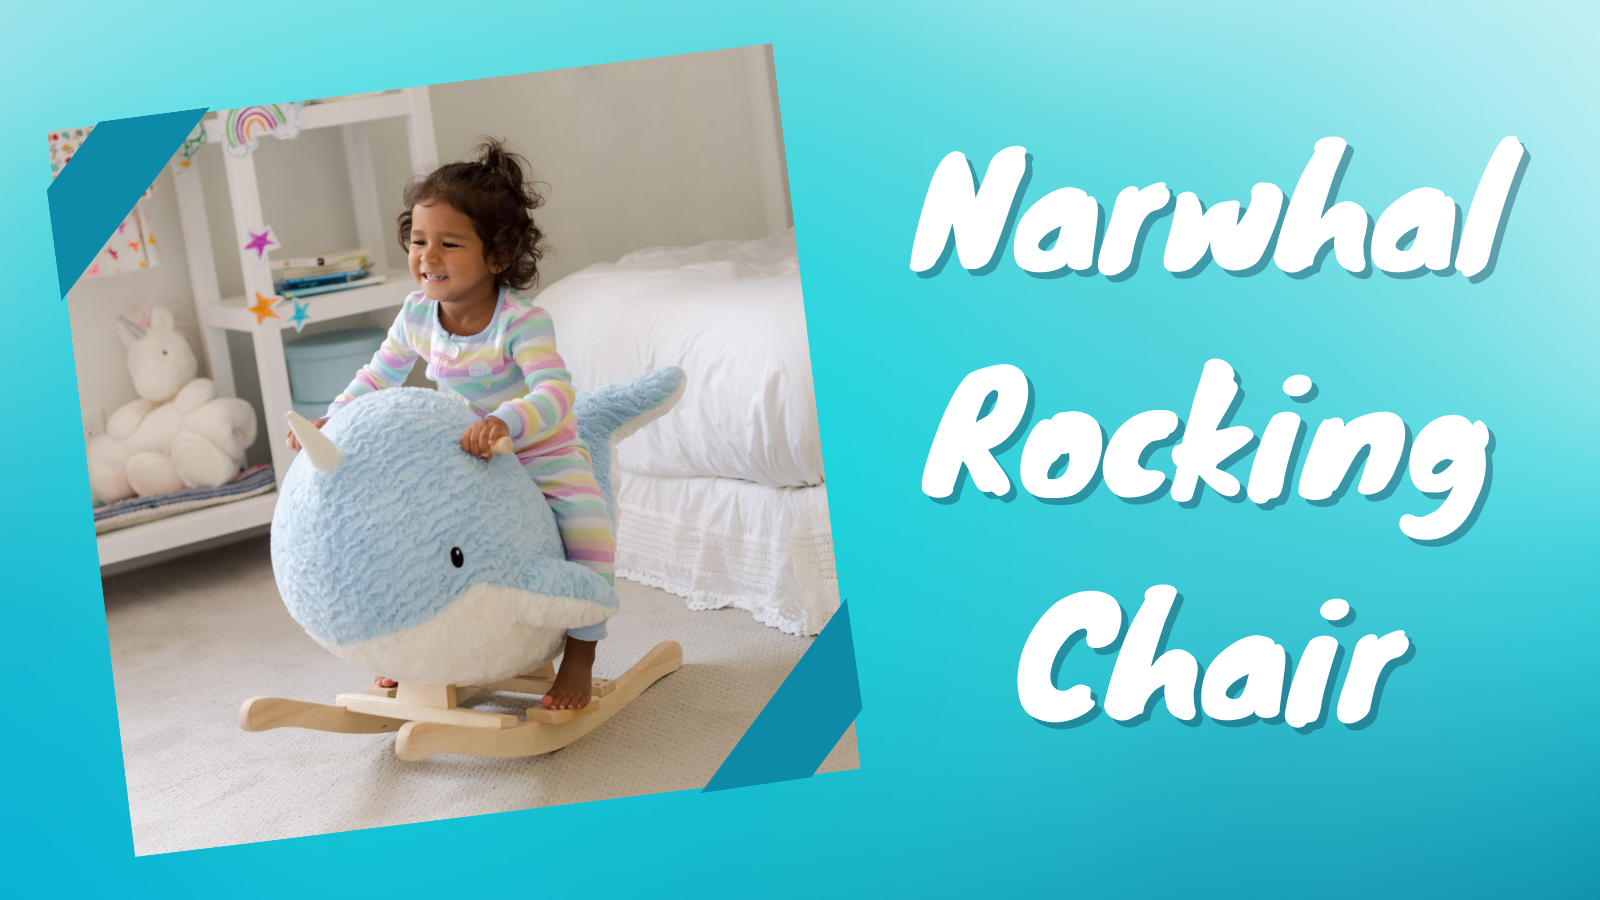 Narwhal Rocking Chair